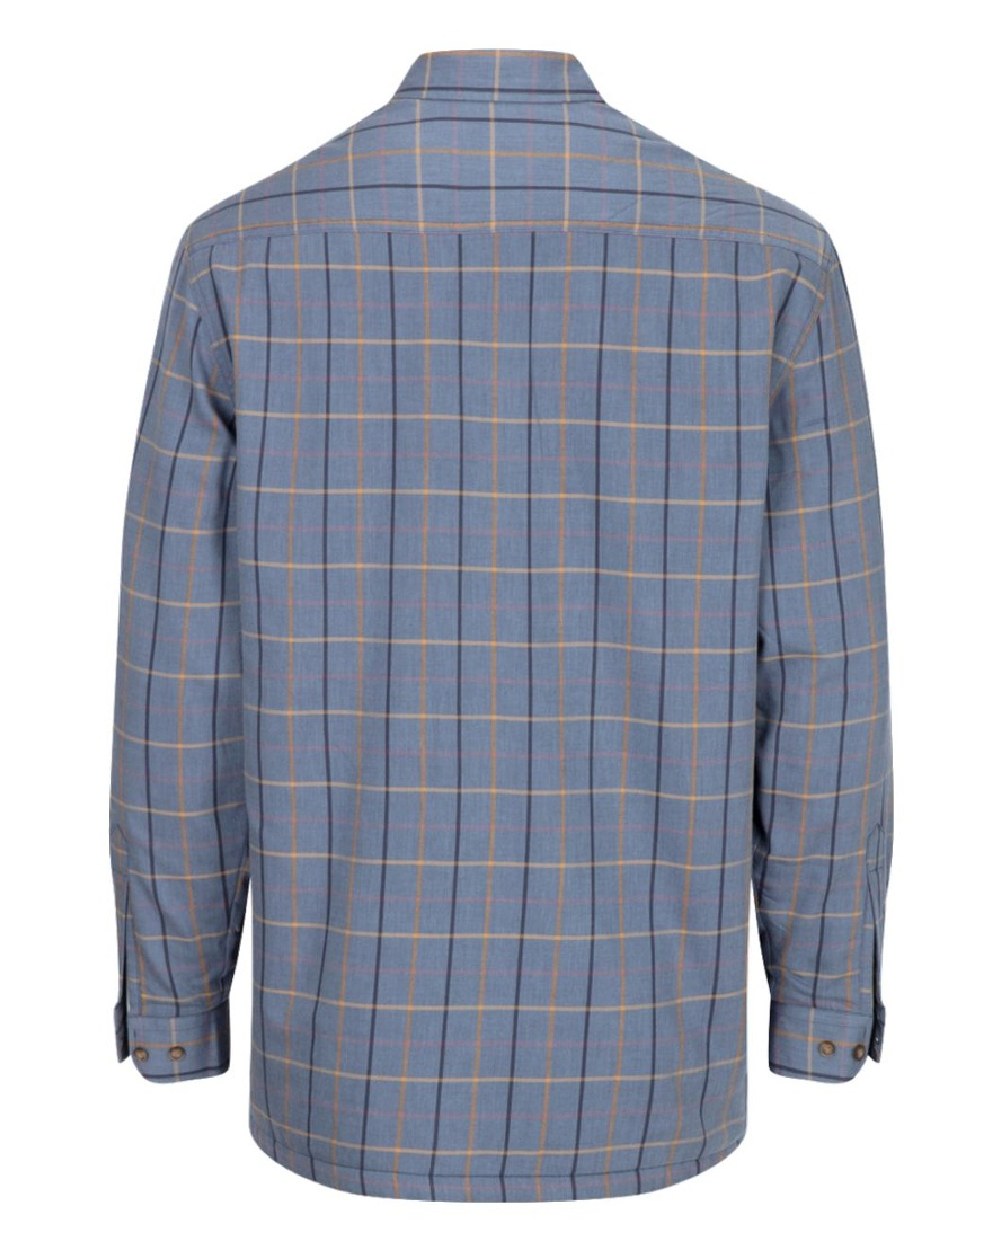 Hoggs of Fife Micro Fleece Lined Shirt in Blackthorn 